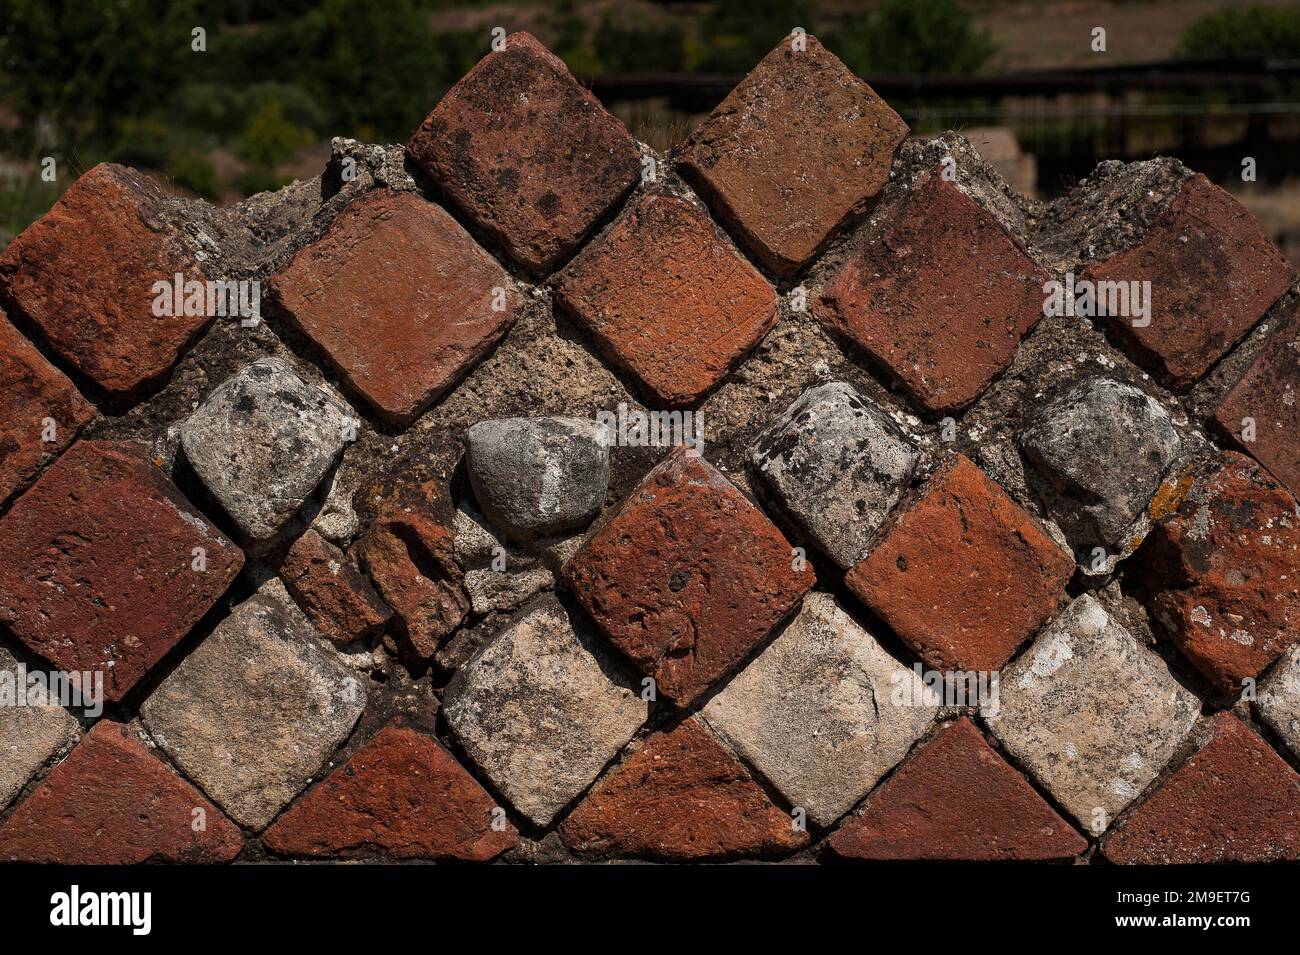 Close detail view of Opus reticulatum, decorative ancient Roman walling using blocks of stone, brick or tuff laid in diagonal grid patterns.  Top of ruined wall in southern district of Velia, a Greco-Roman seaport on southern Italy’s Tyrrhenian Sea coast at Marina di Ascea, Campania. Stock Photo